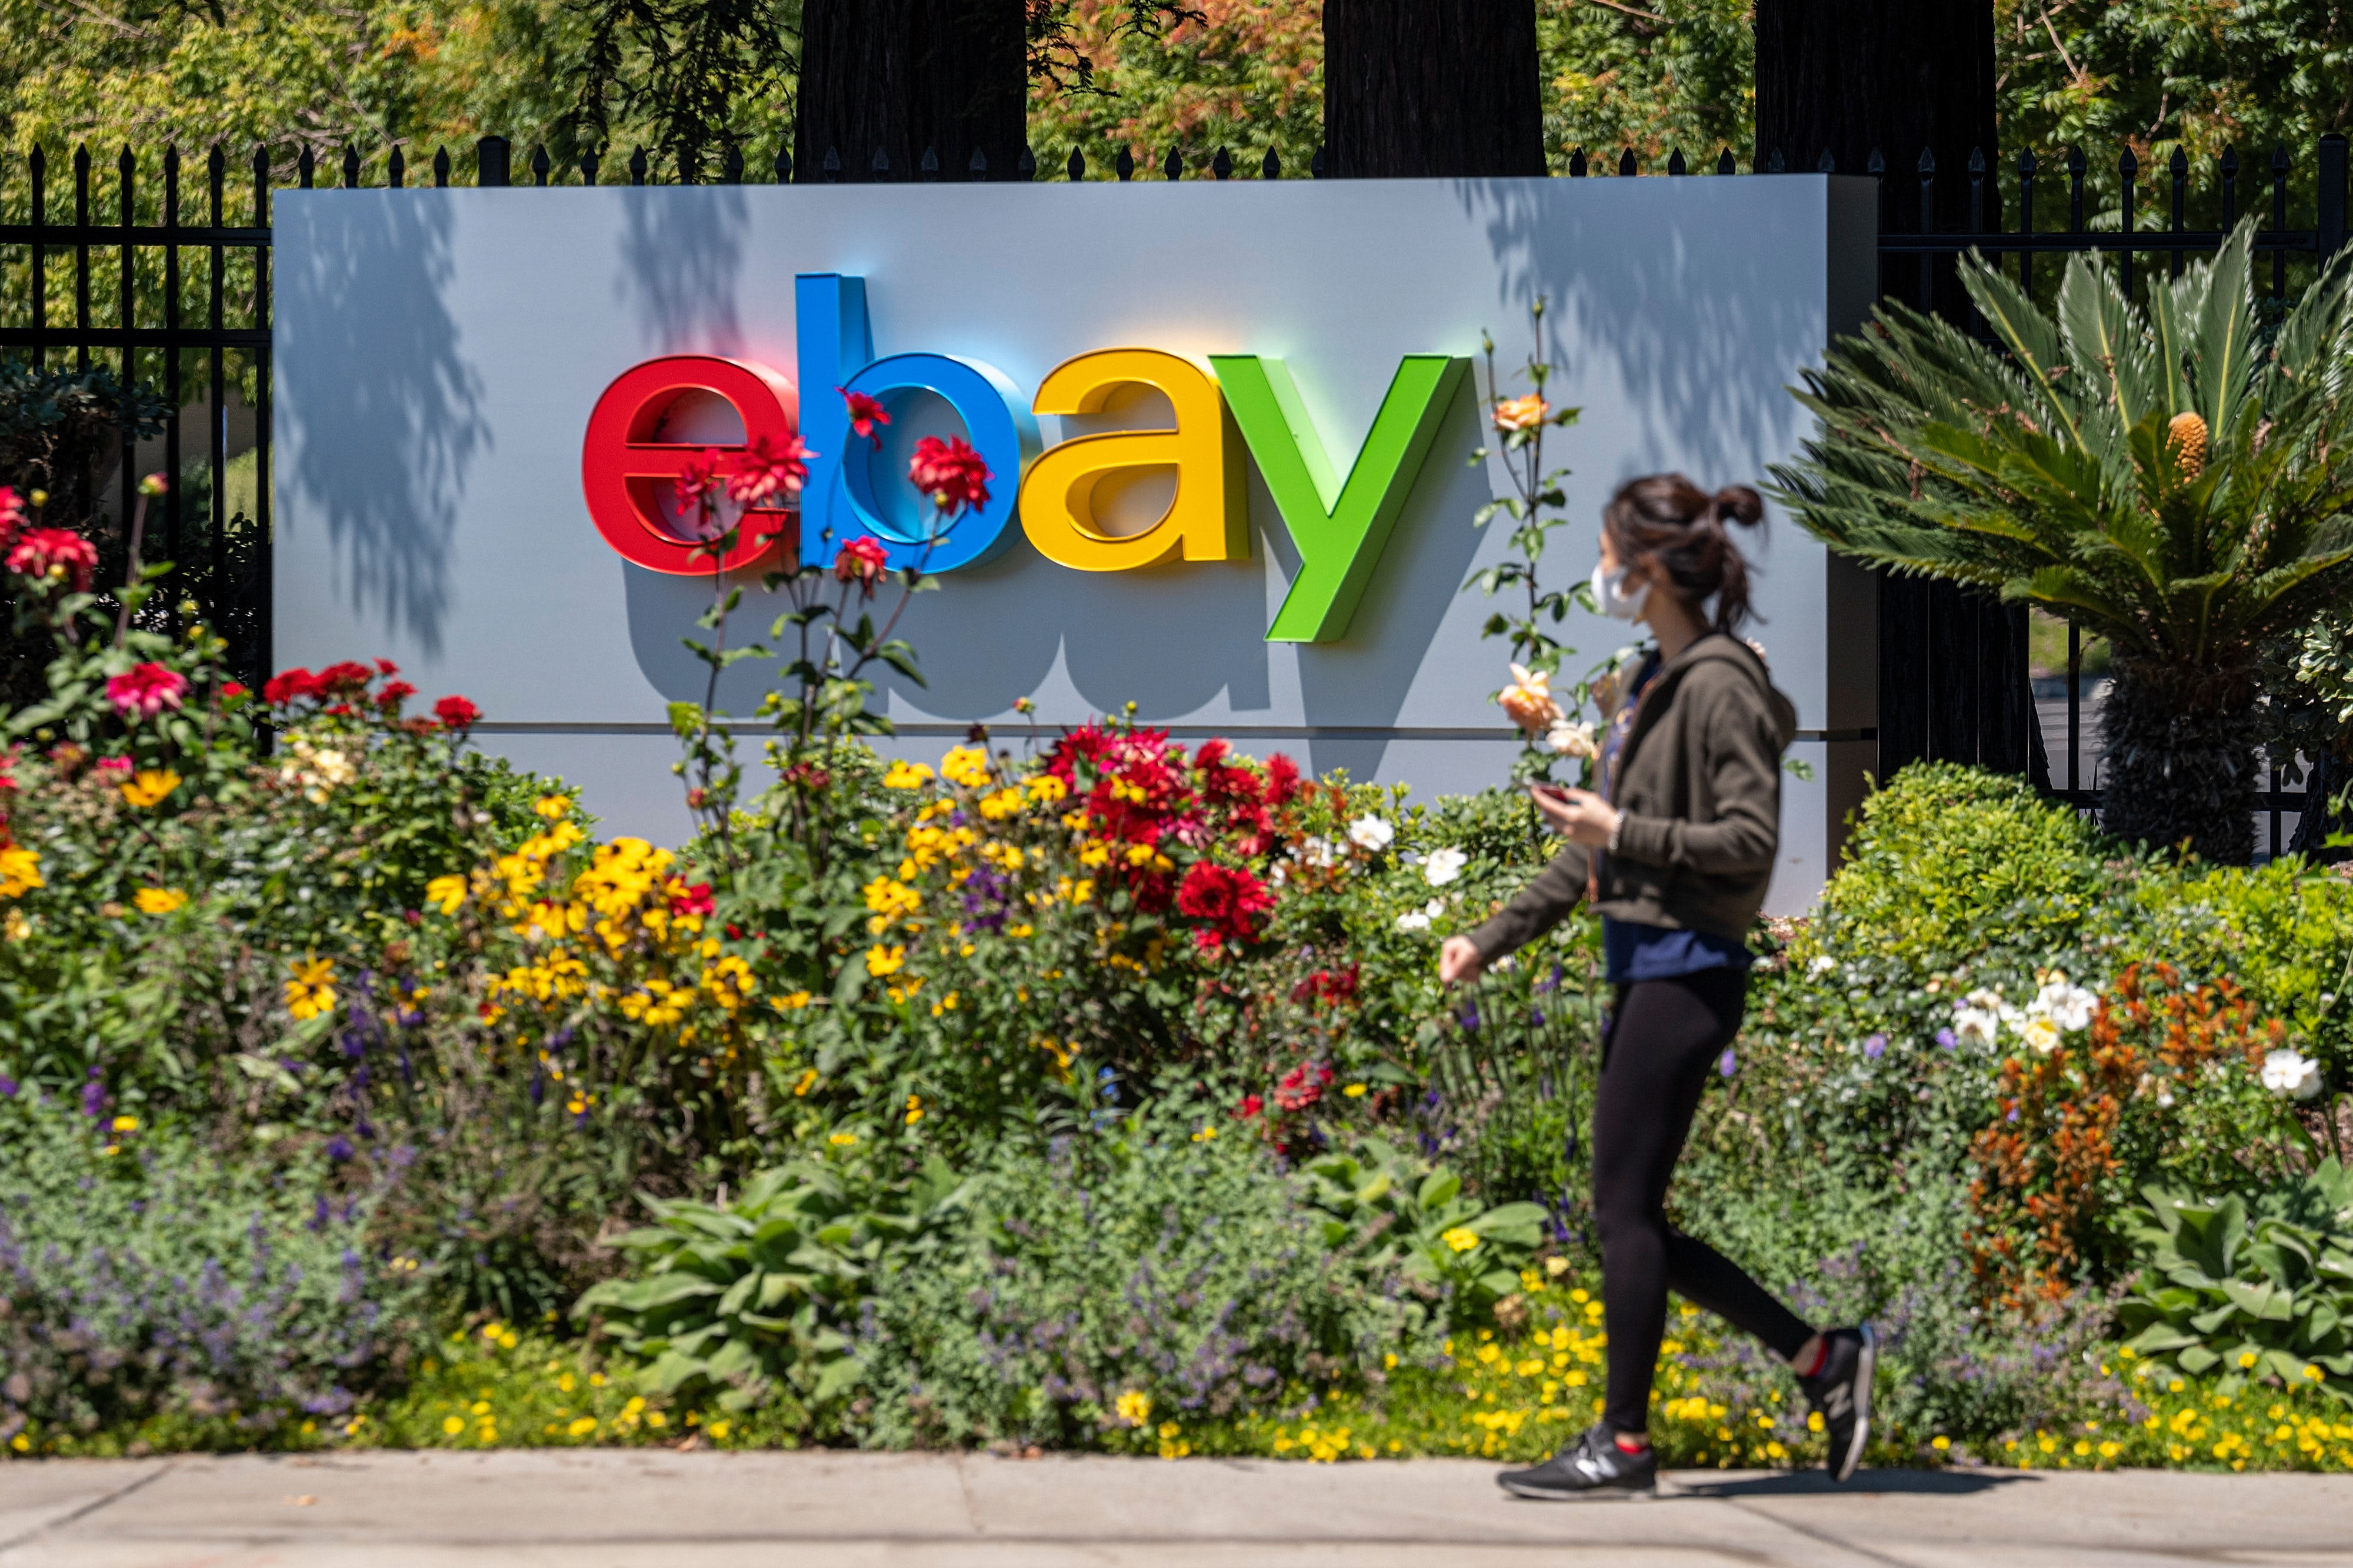 EBay stock sinks after the company gives disappointing guidance – CNBC